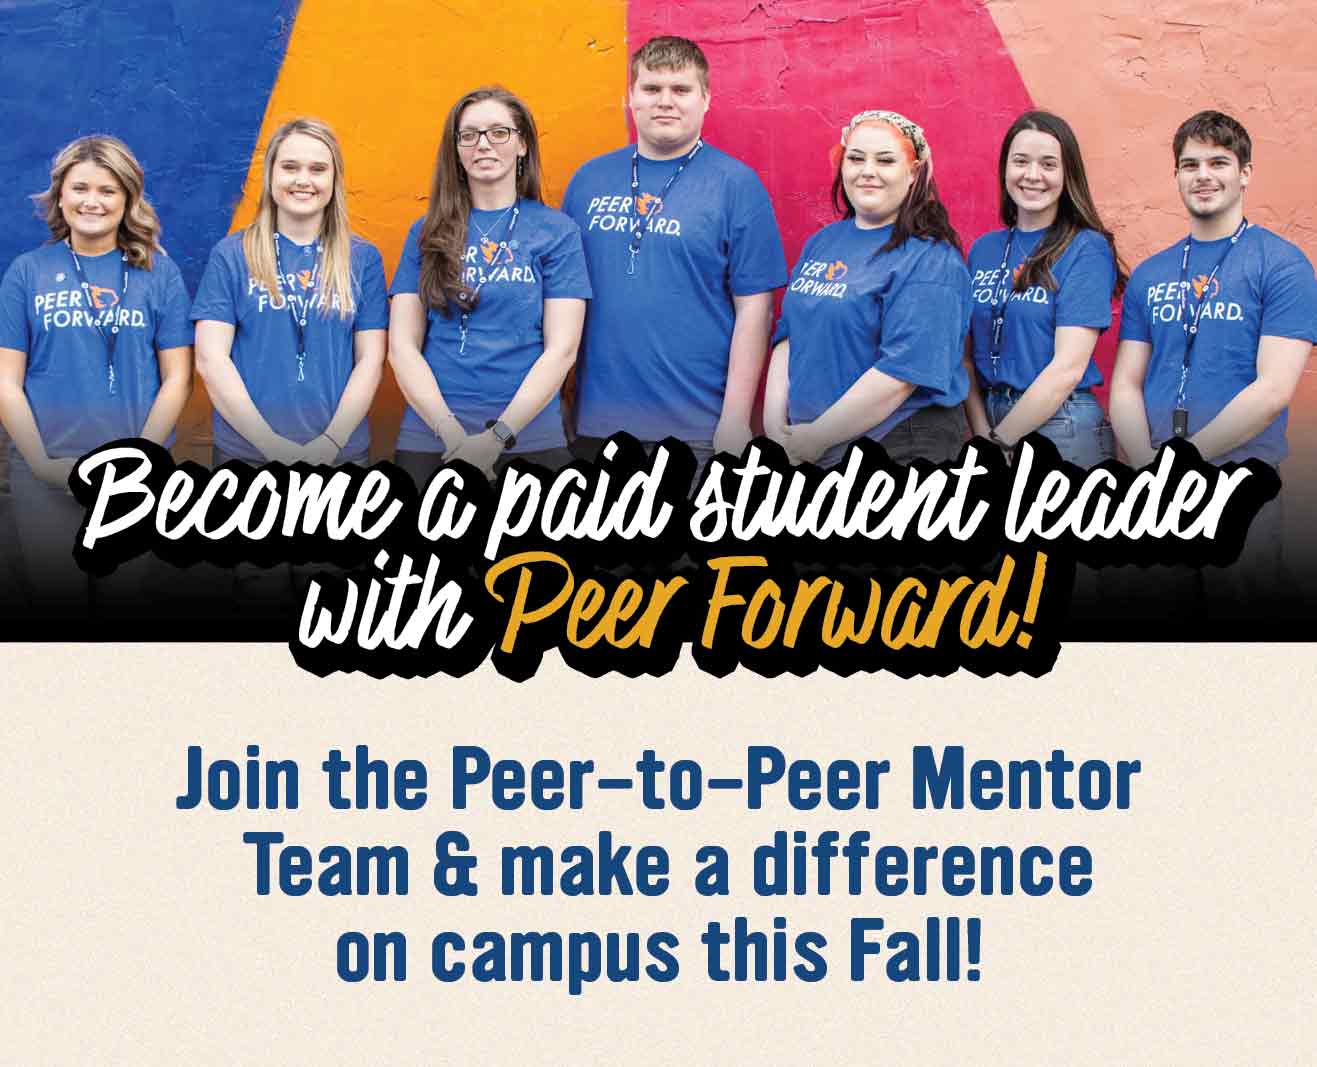 Become a paid student leader with peer forward! Join the Peer-to-Peer Mentor Team and Make a Difference on Campus this Fall!